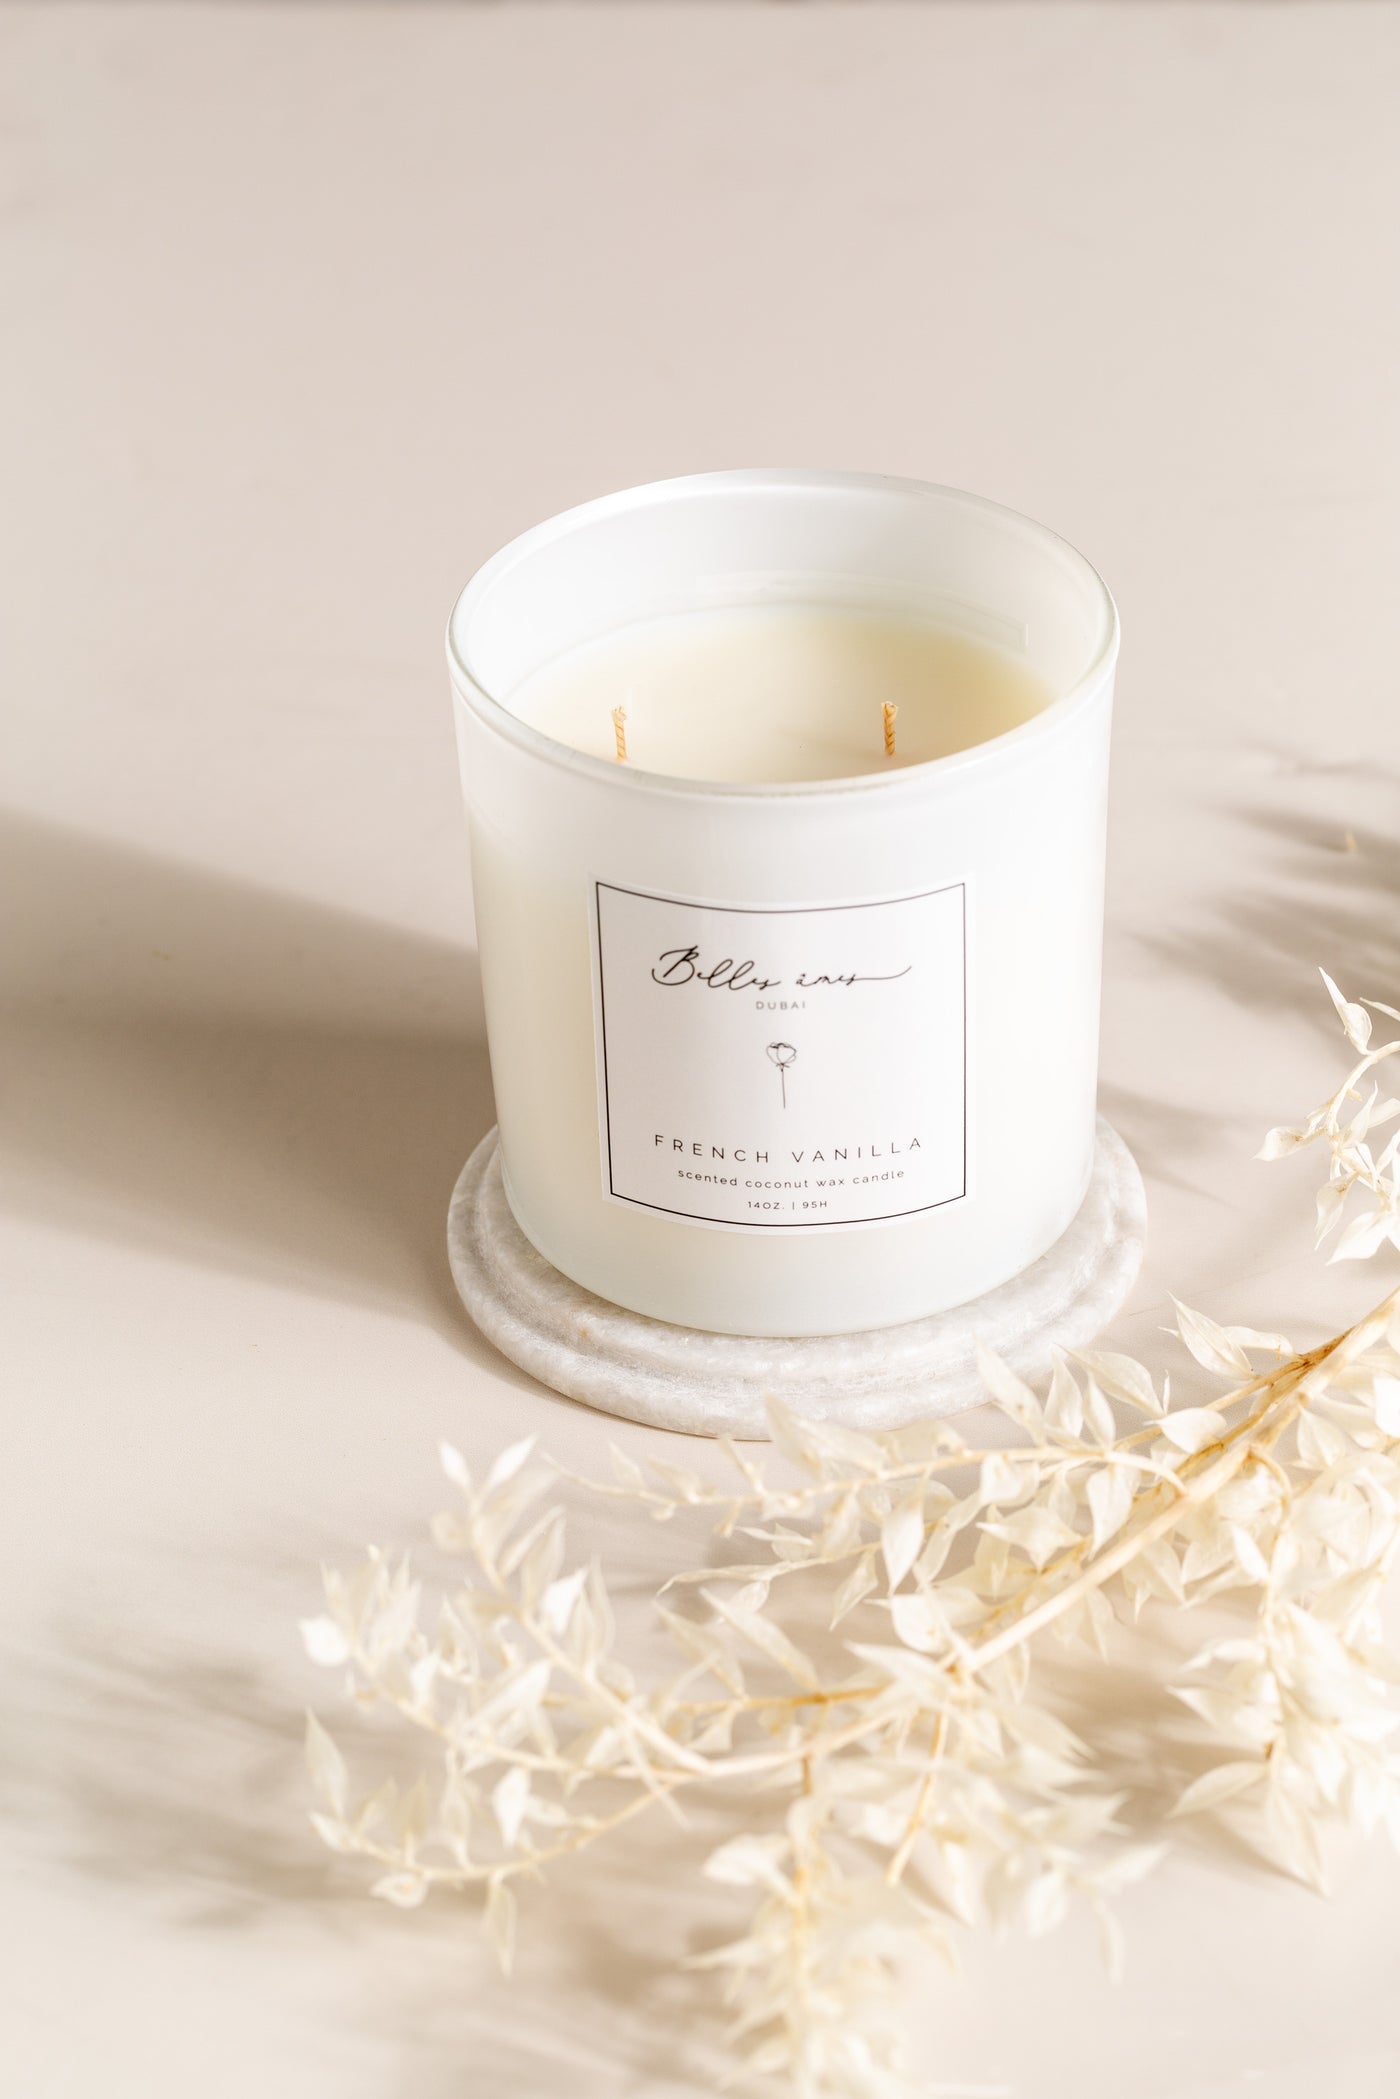 french-vanilla-scented-candle-mat-white-vessel